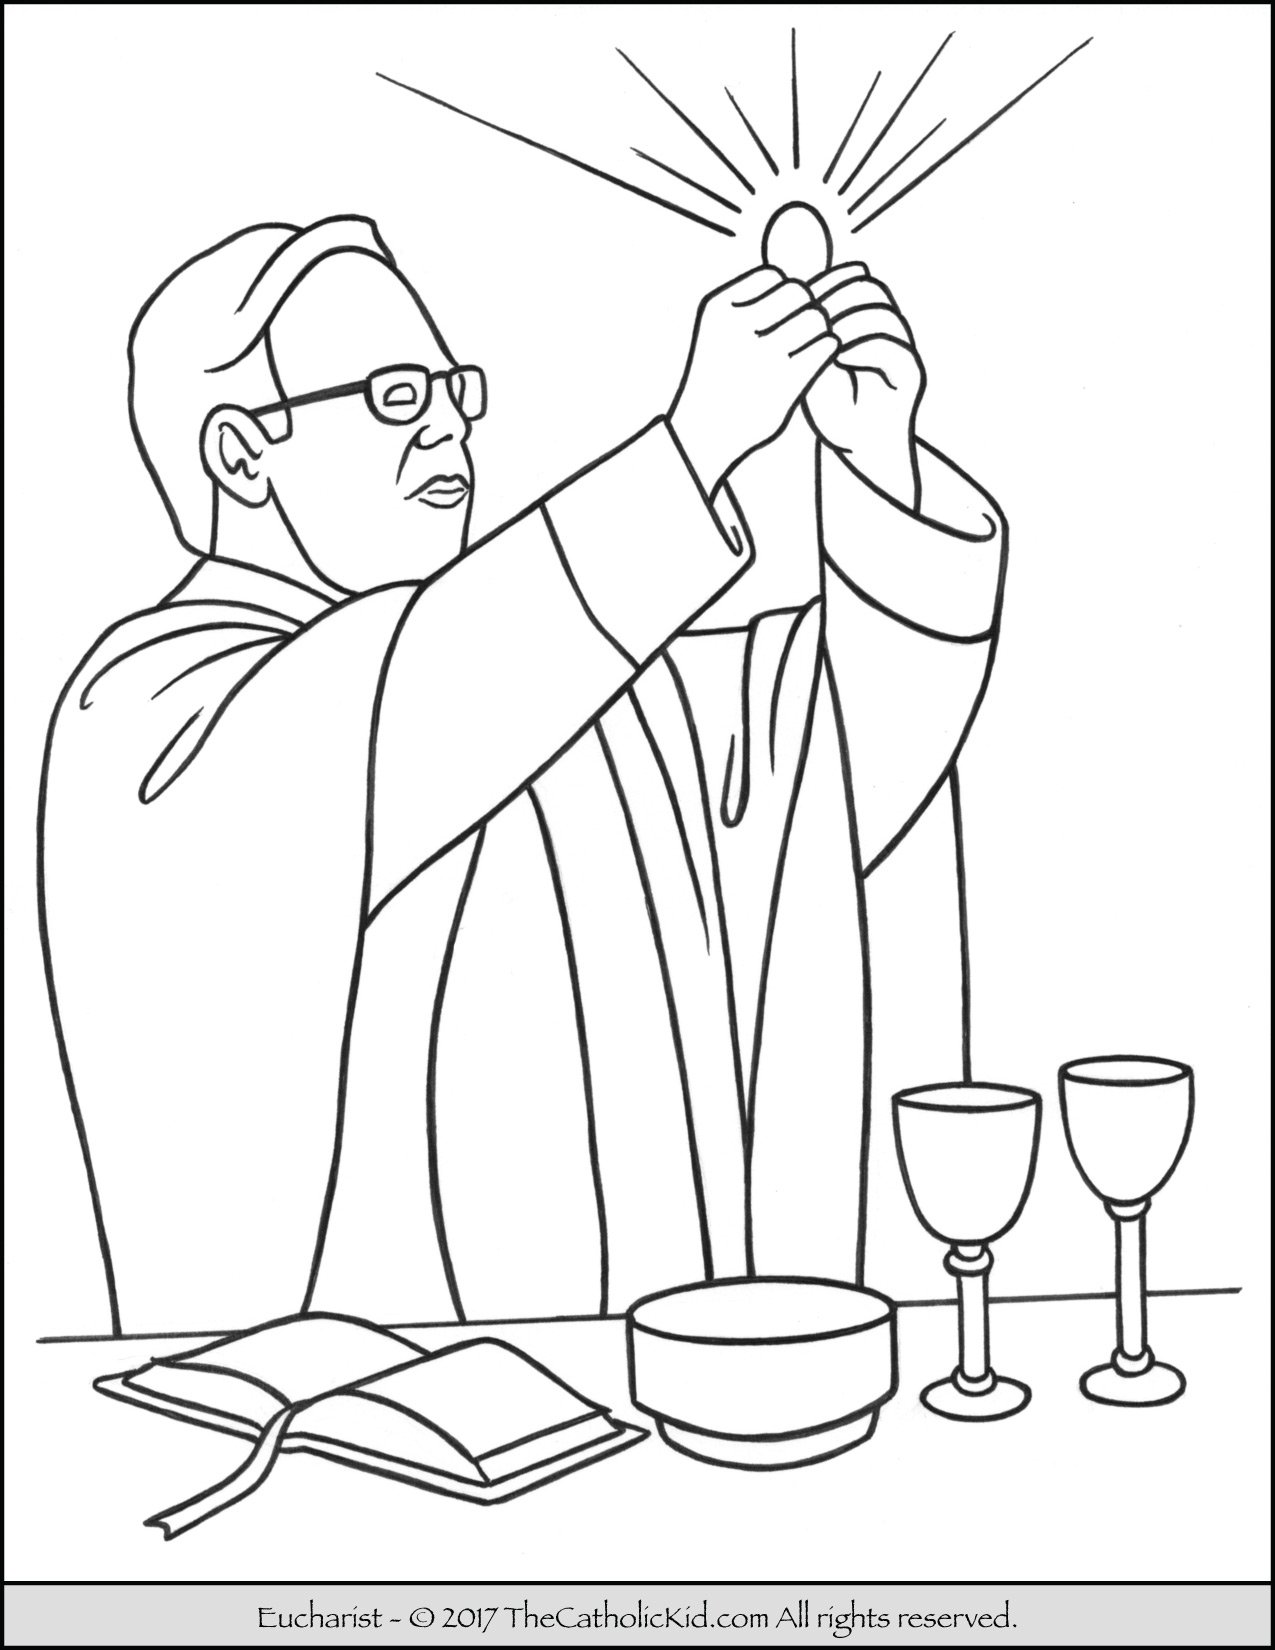 Sacrament of the eucharist coloring pages